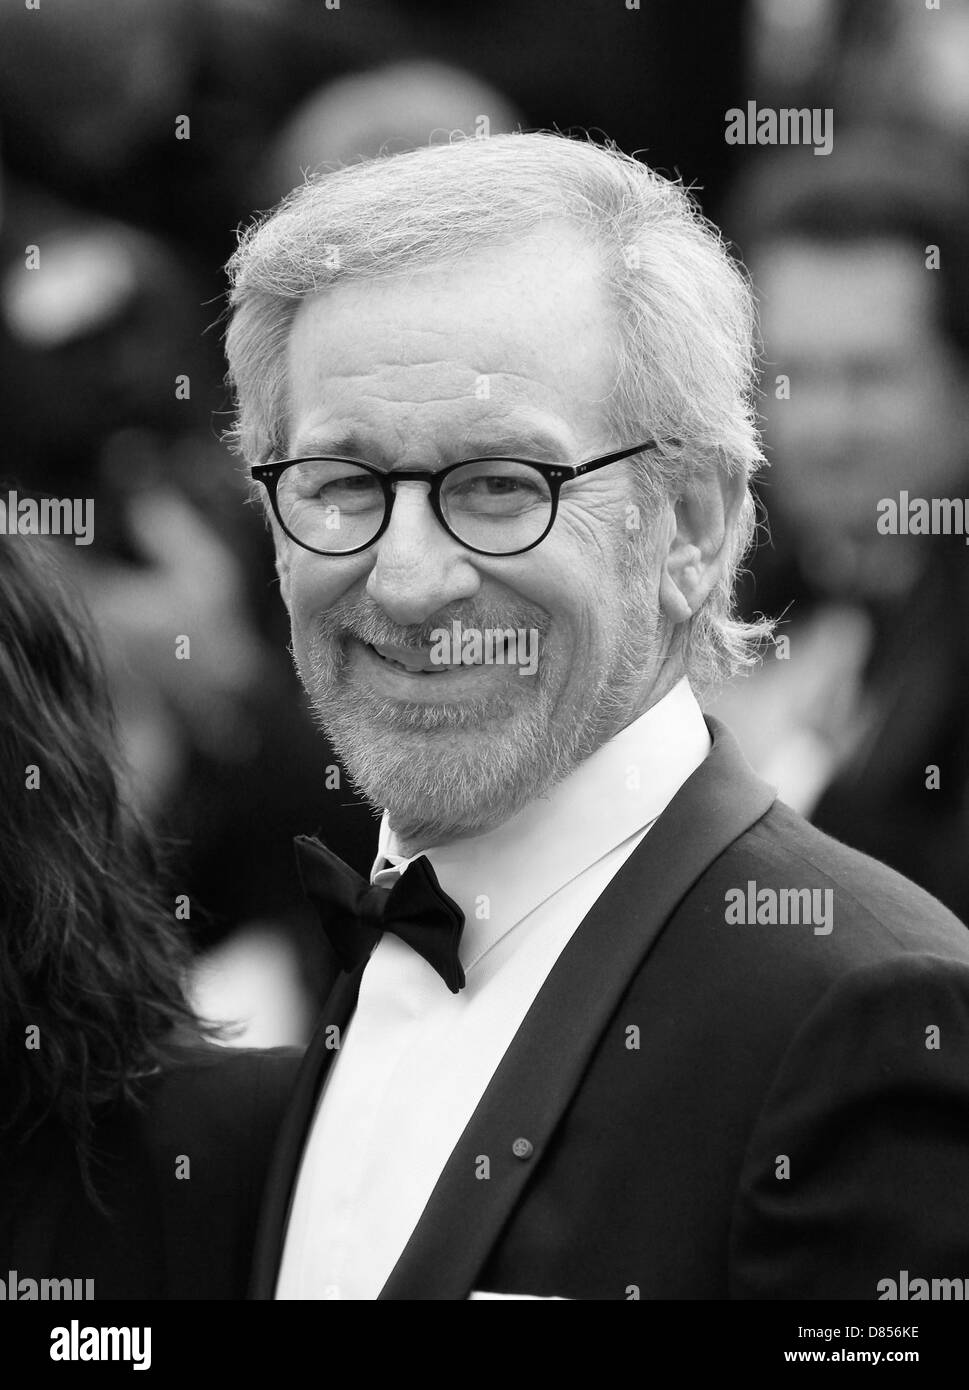 Cannes, France. 19th May 2013. Steven Spielberg attends Inside Llewyn Davis premiere - The 66th Annual Cannes Film Festival - At Stock Photo